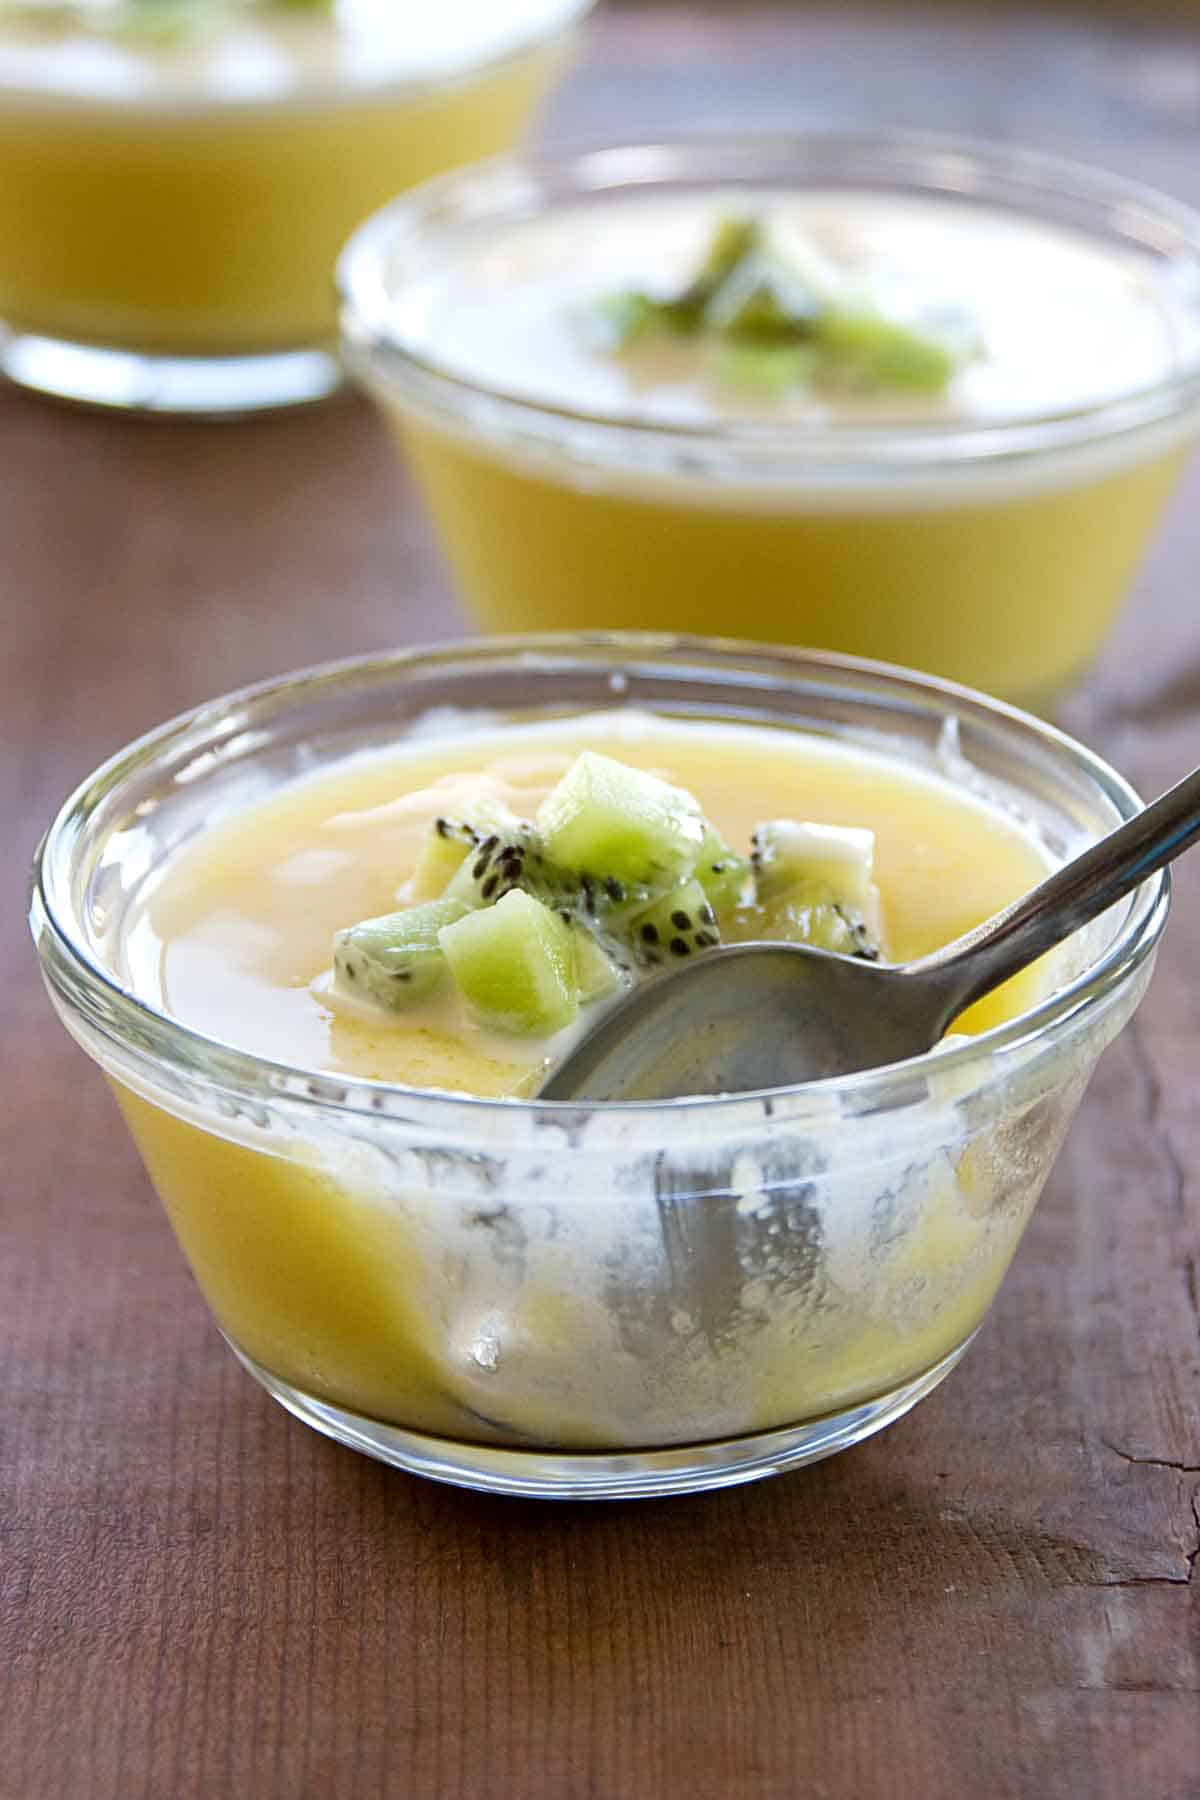 Mango Pudding with a bite taken from it